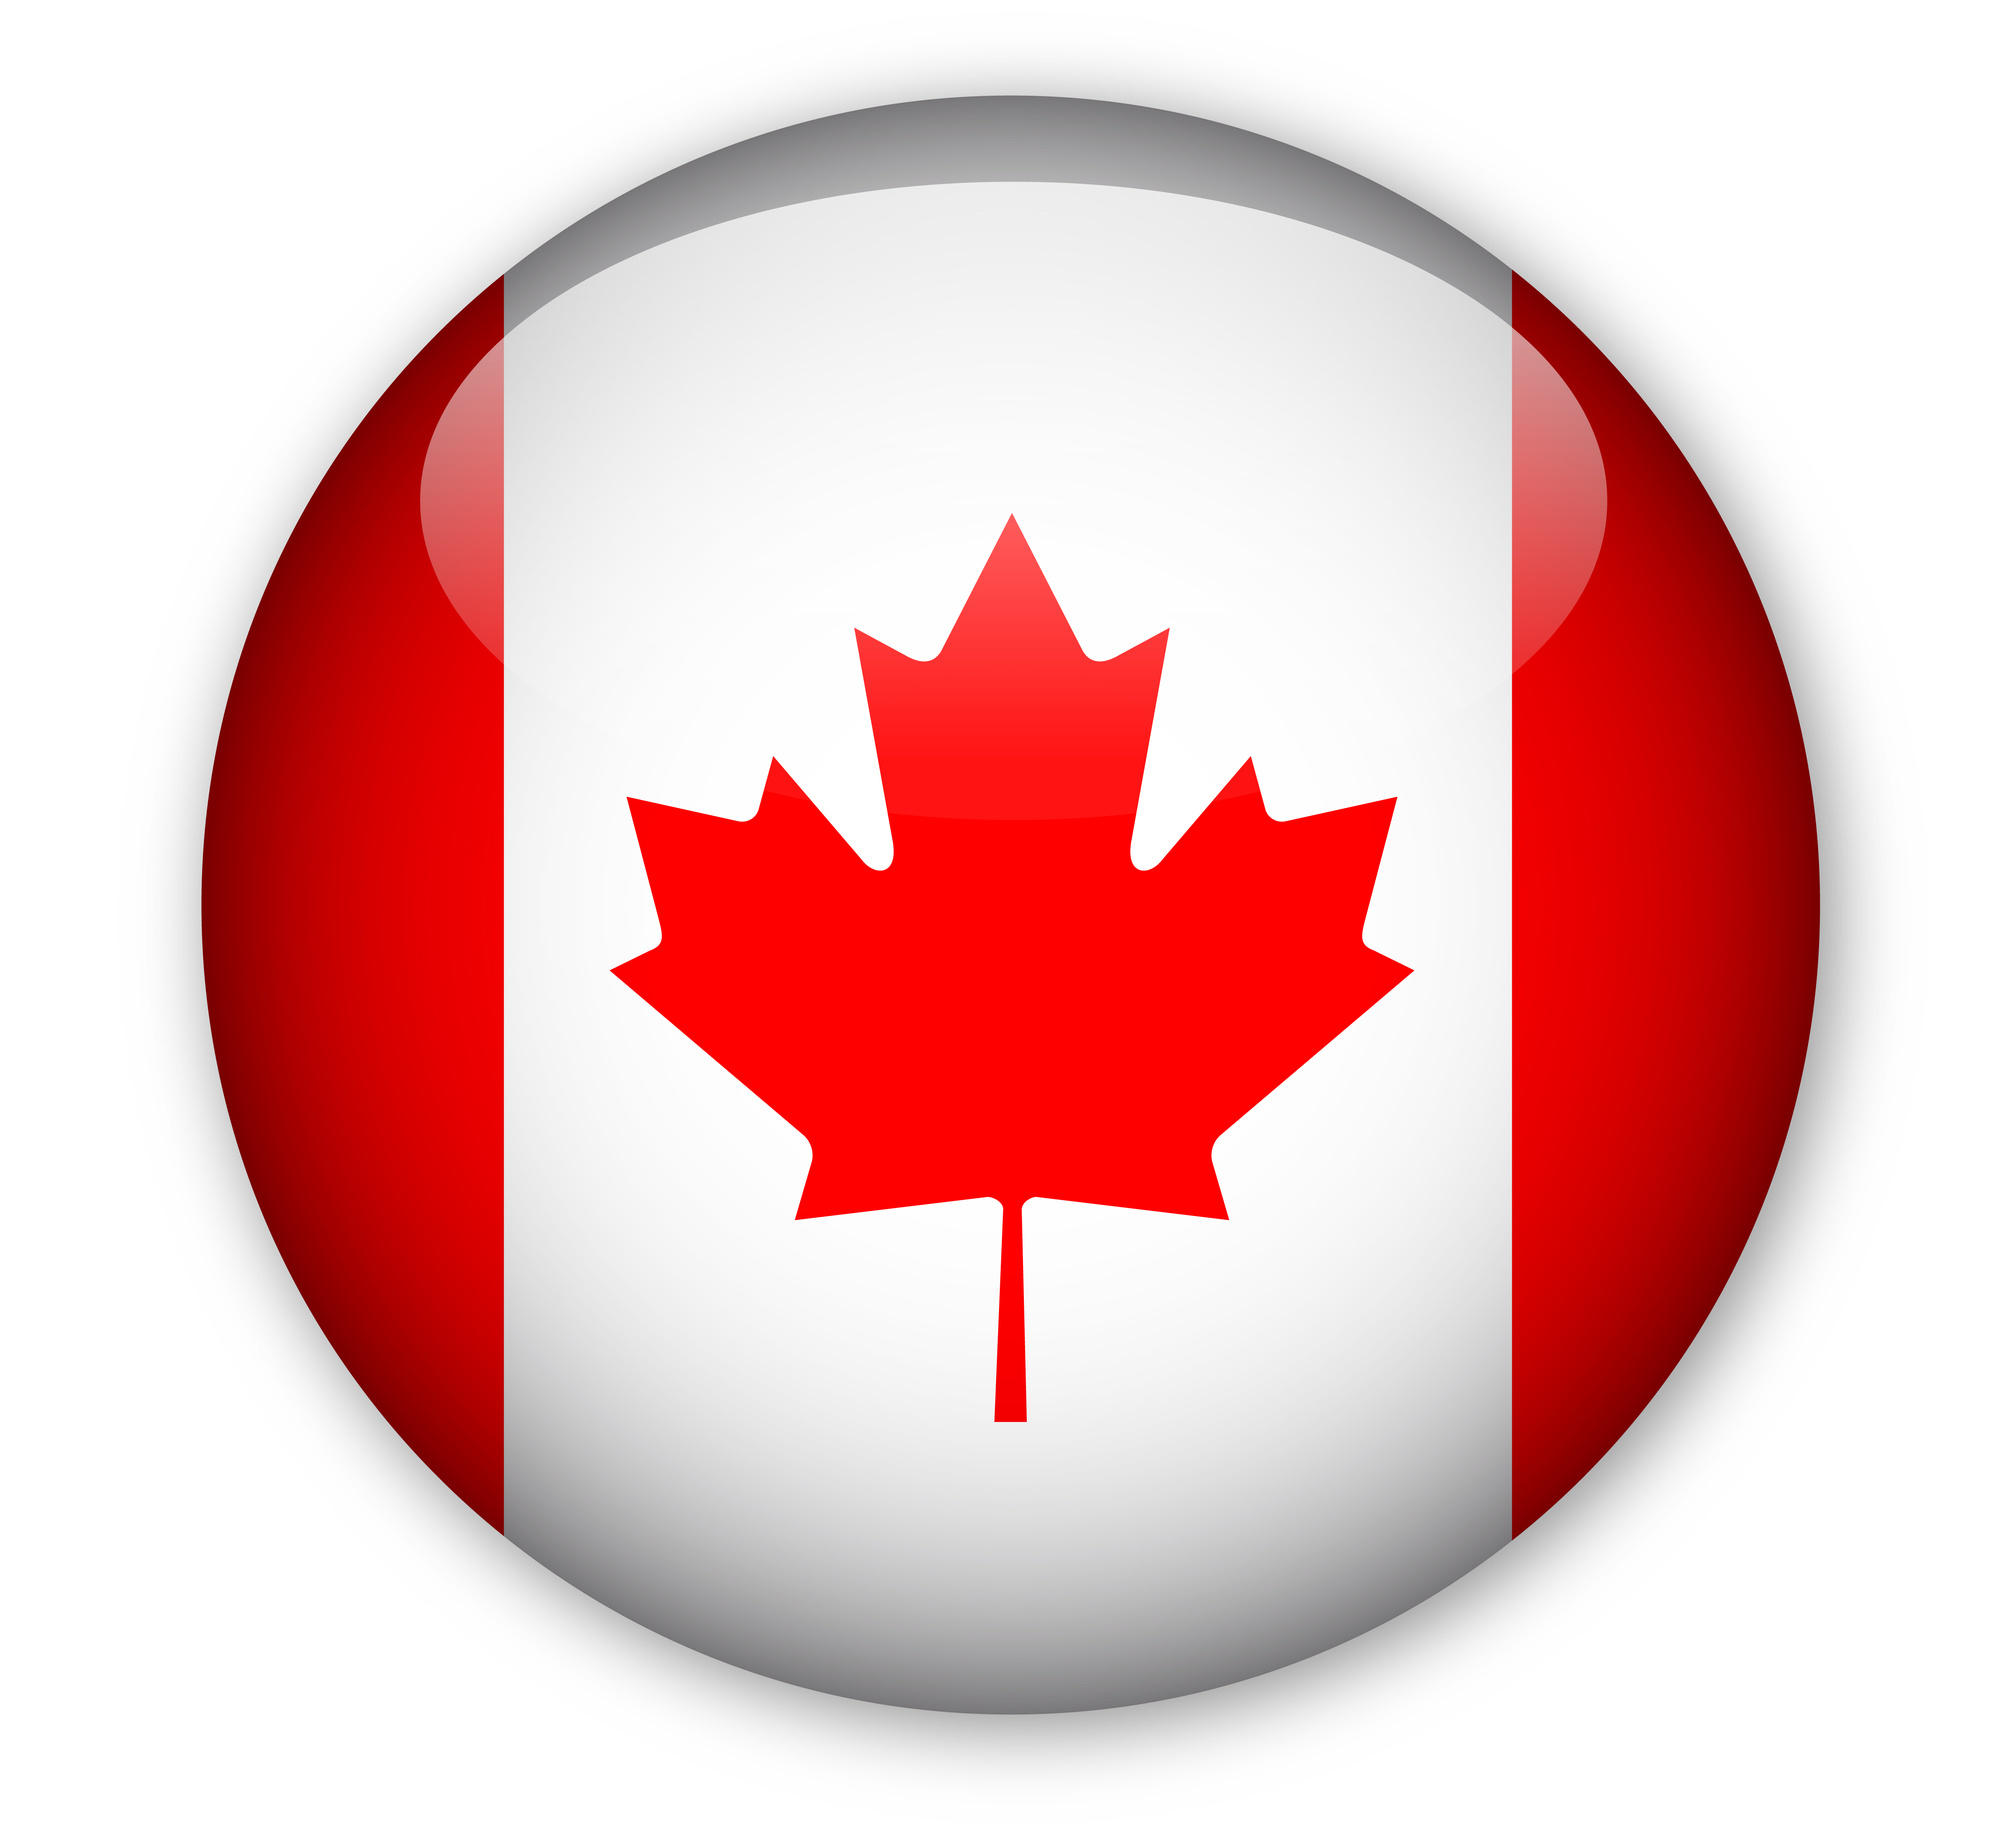 Canadian flag button - The Observation Deck